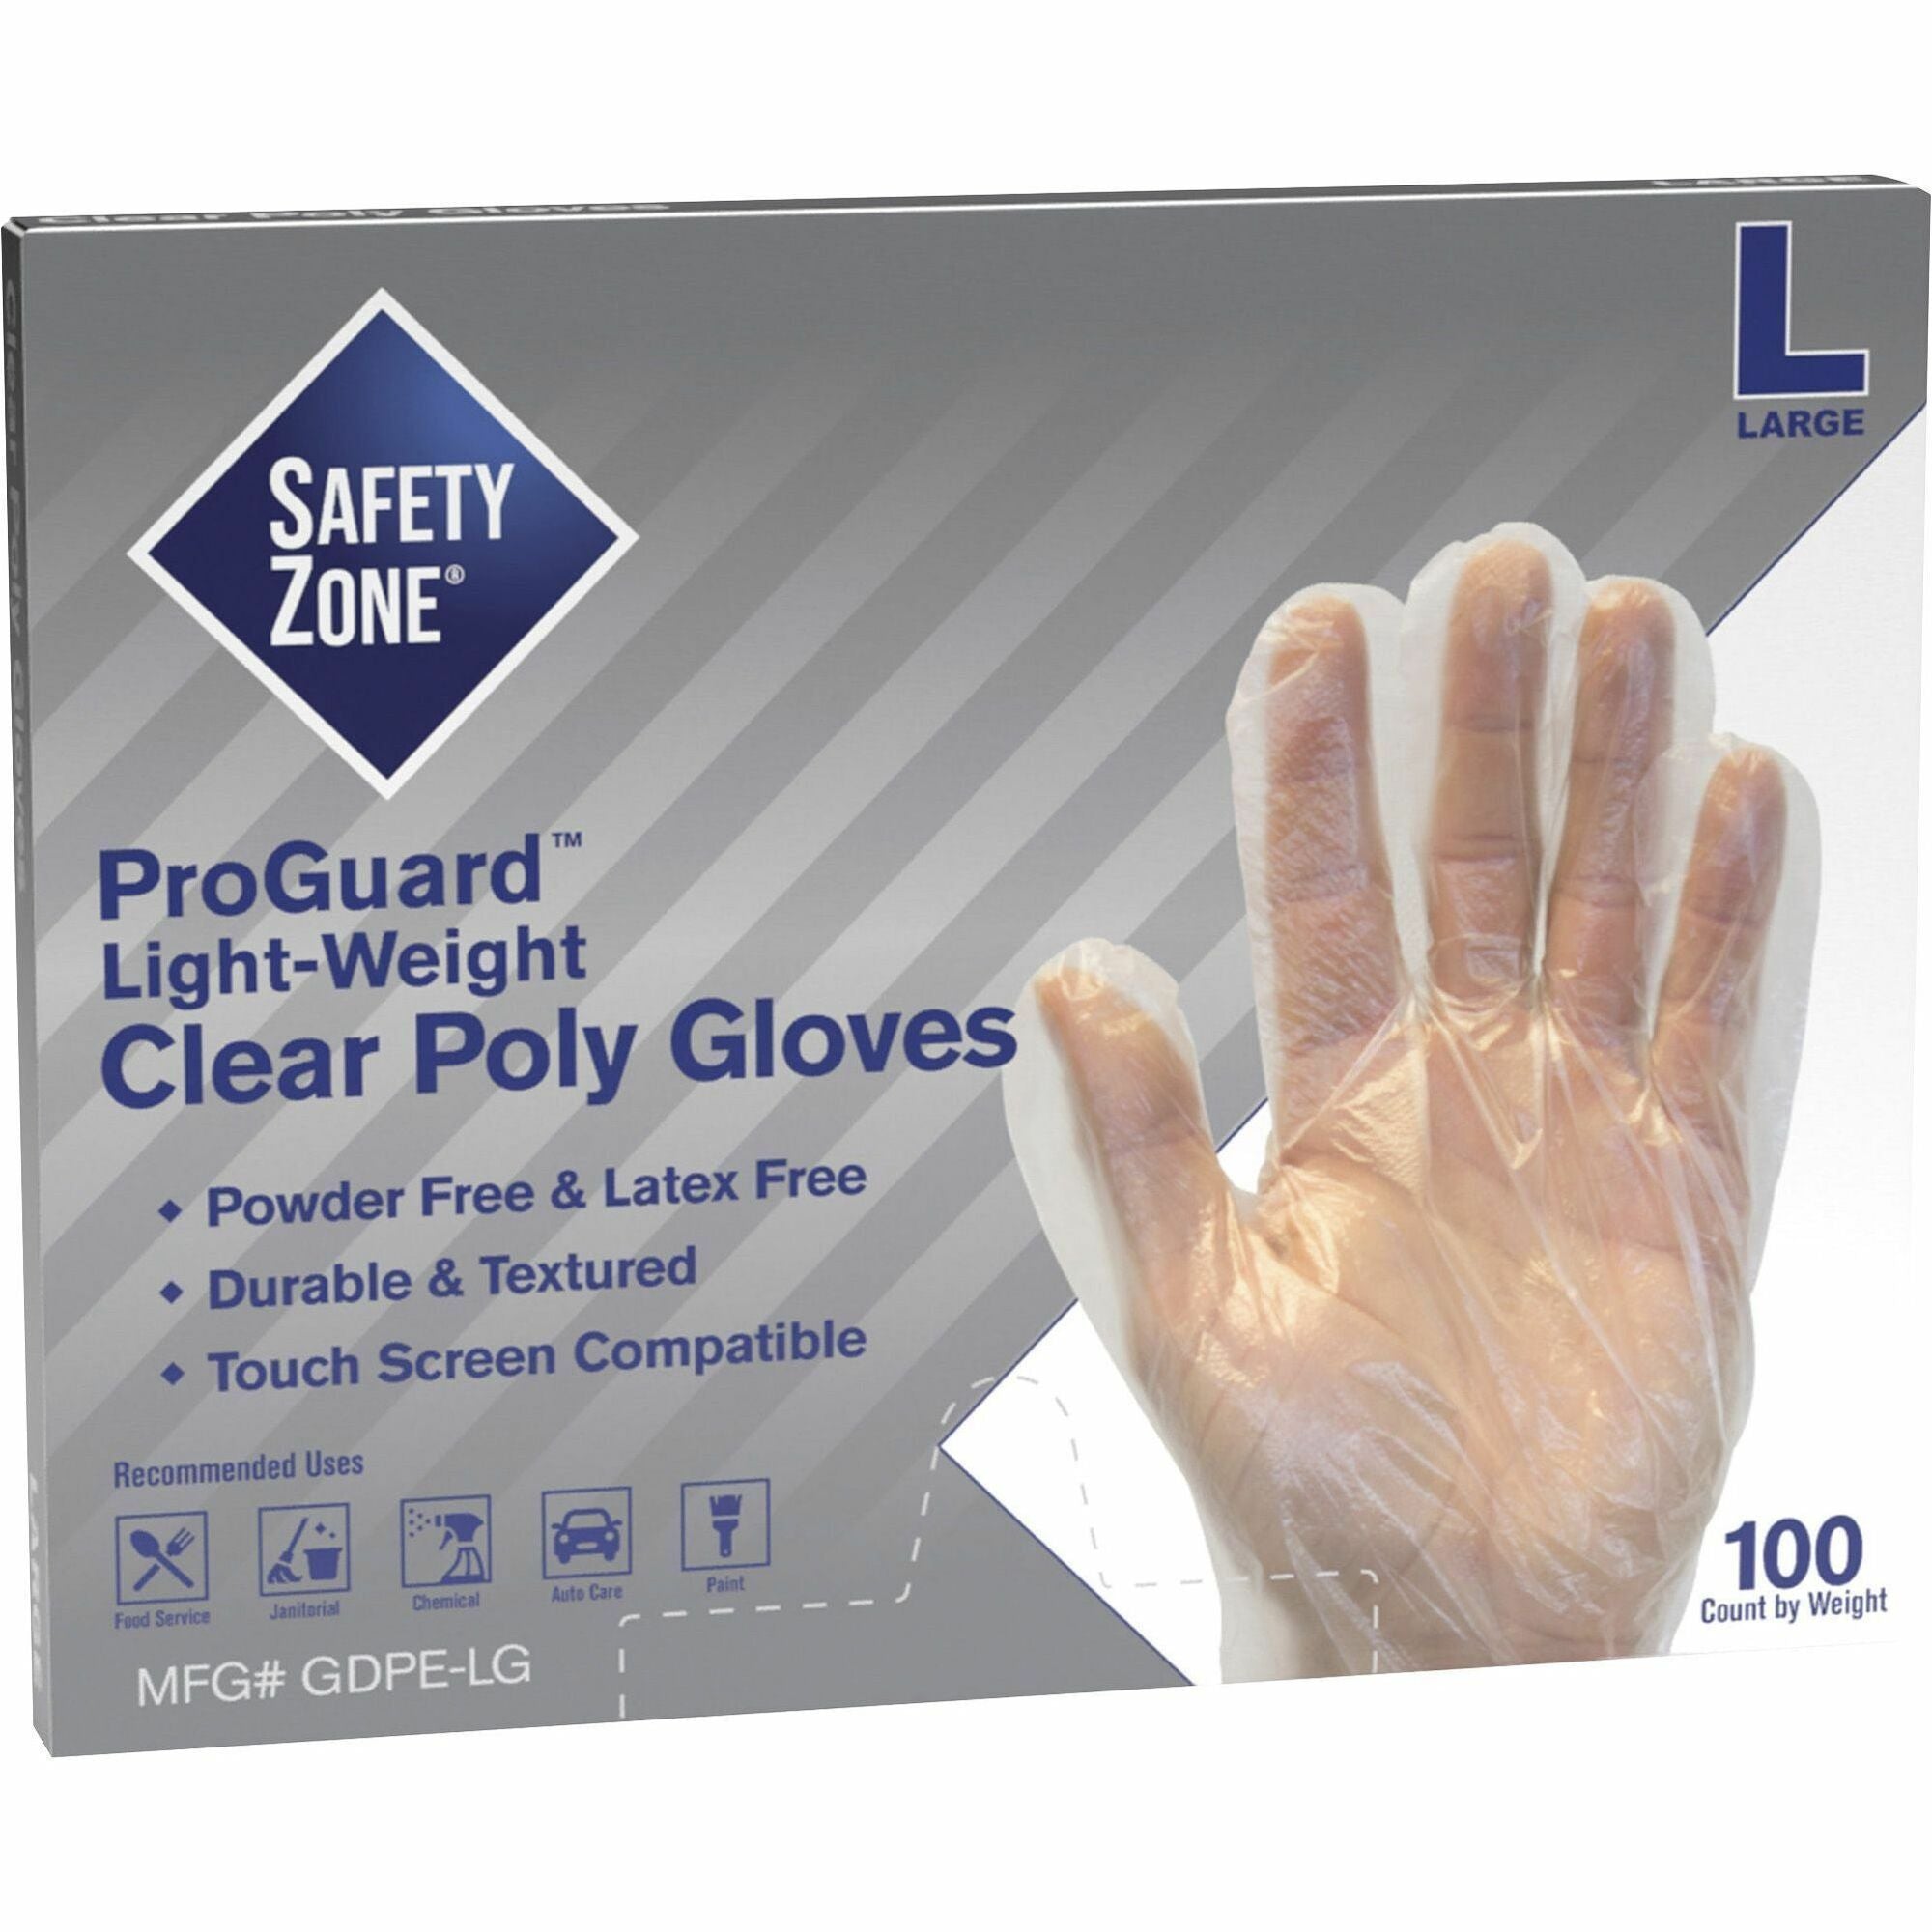 safety-zone-clear-powder-free-polyethylene-gloves-large-size-clear-die-cut-heat-sealed-edge-embossed-grip-latex-free-silicone-free-recyclable-for-food-100-pack-1175-glove-length_szngdpelg - 1